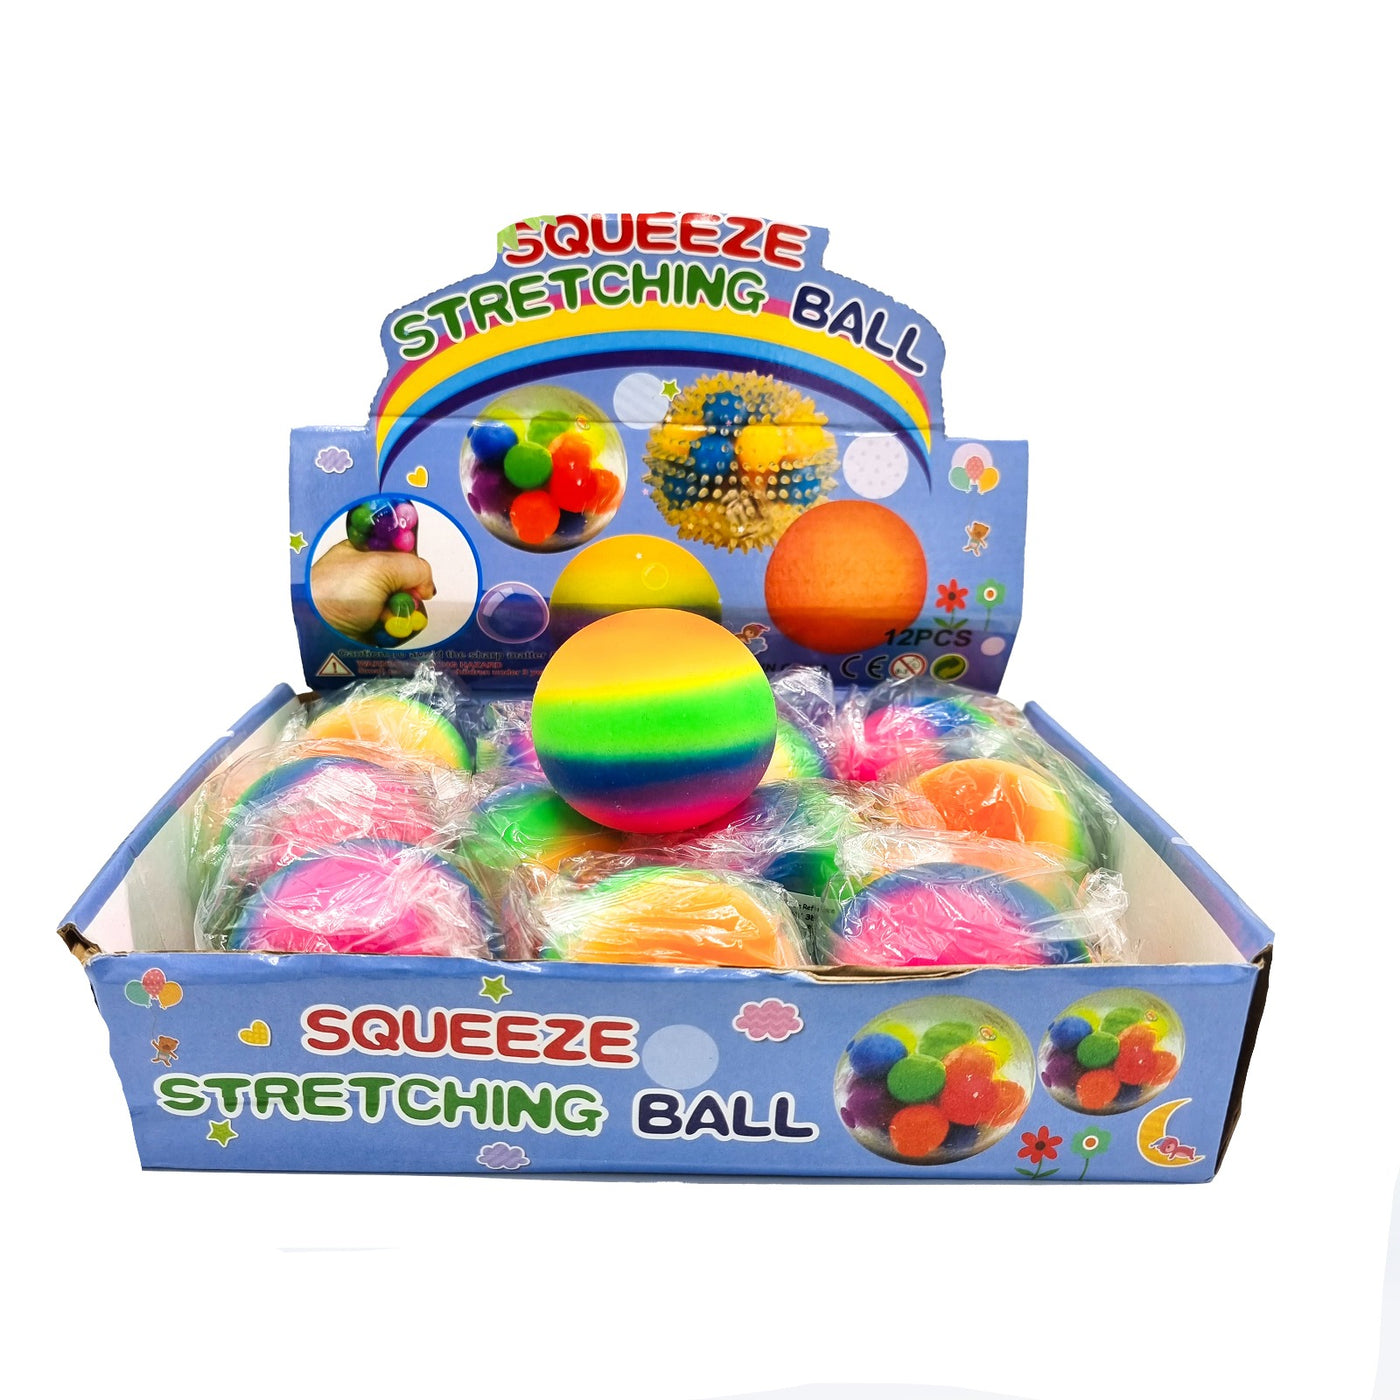 Pre Filled Unisex Colourful Birthday Party Bags With Toys And Sweets For Kids, Party Favours.